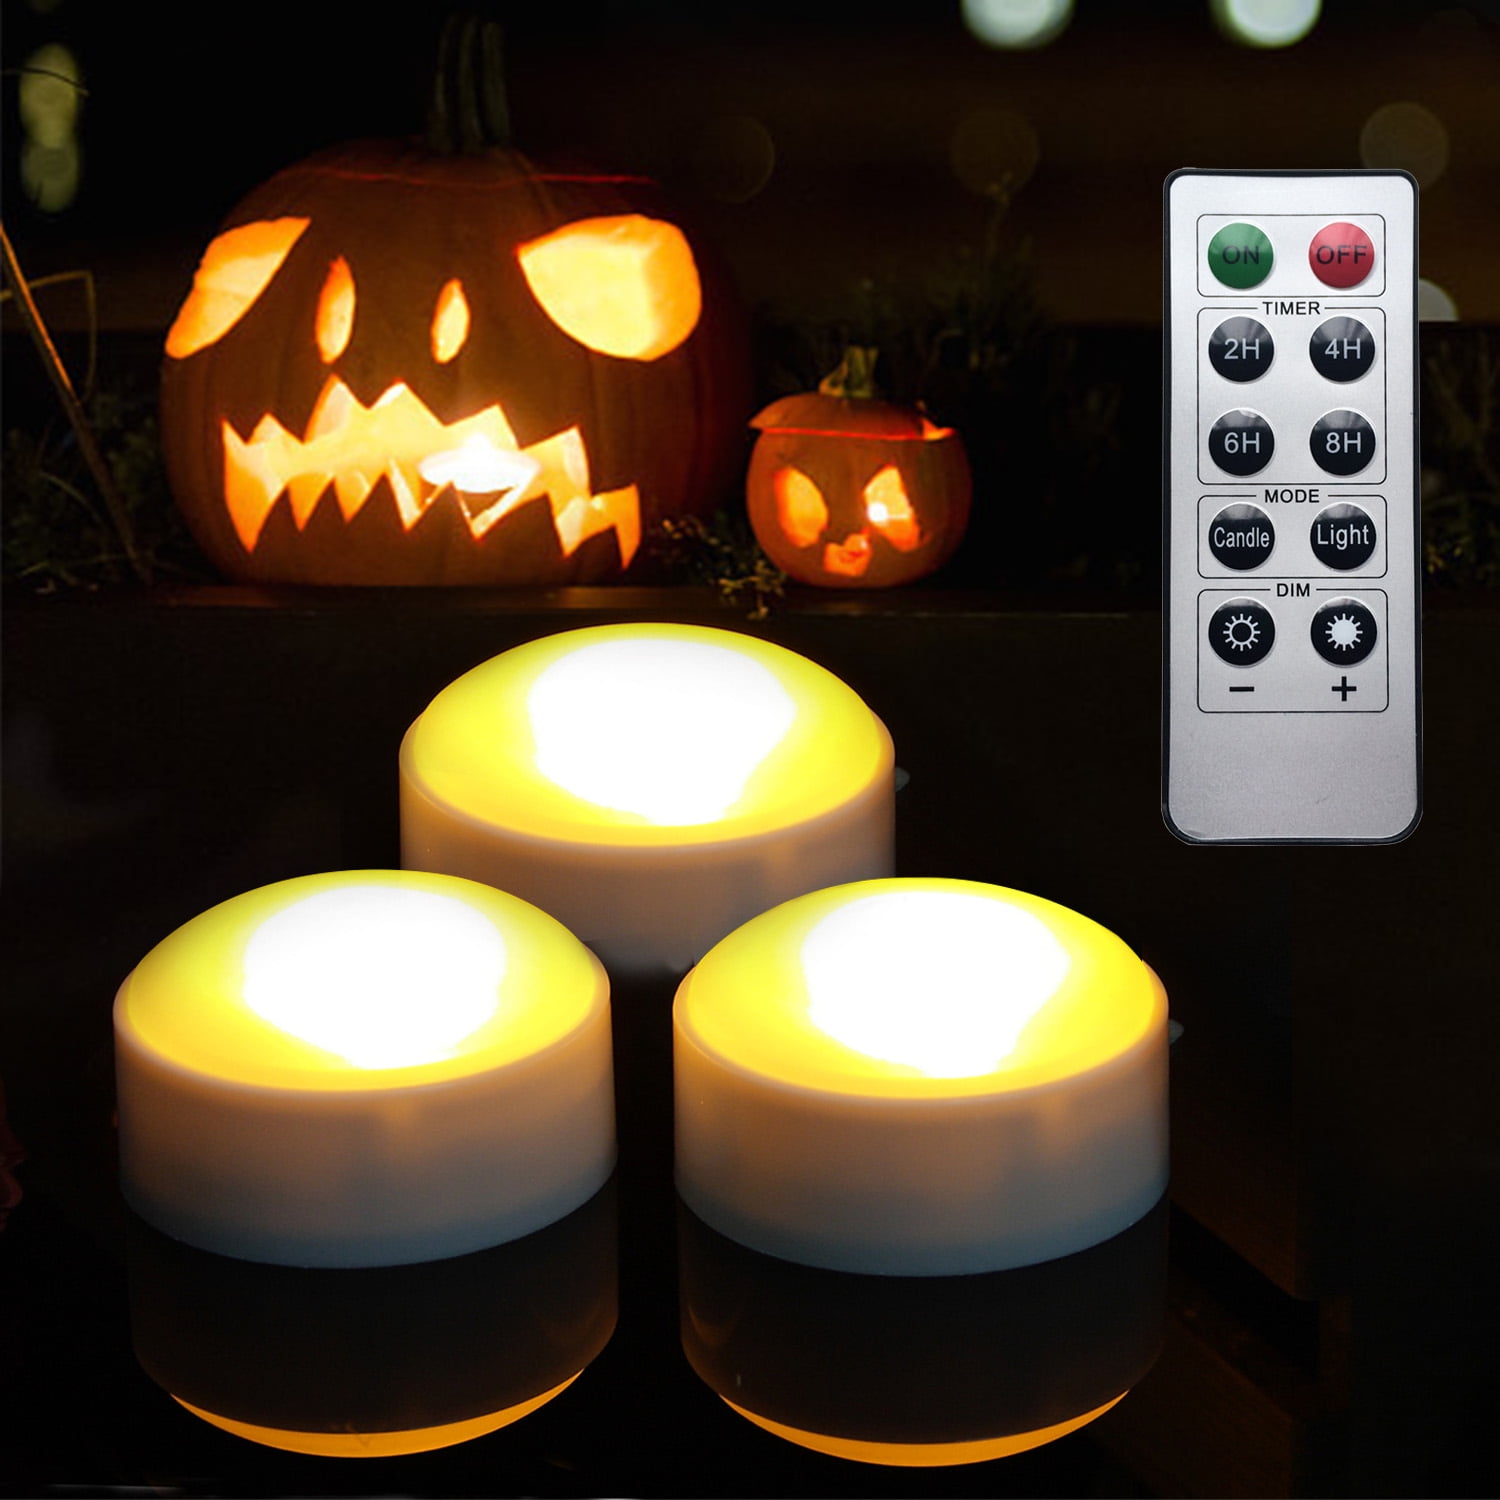 Bright Flickering Flameless Candle Set for Jack-O-Lantern Décor Party Home Christmas Halloween Decorations 1 Pack Battery Operated LED Halloween Pumpkin Light with Remote and Timer Orange Color